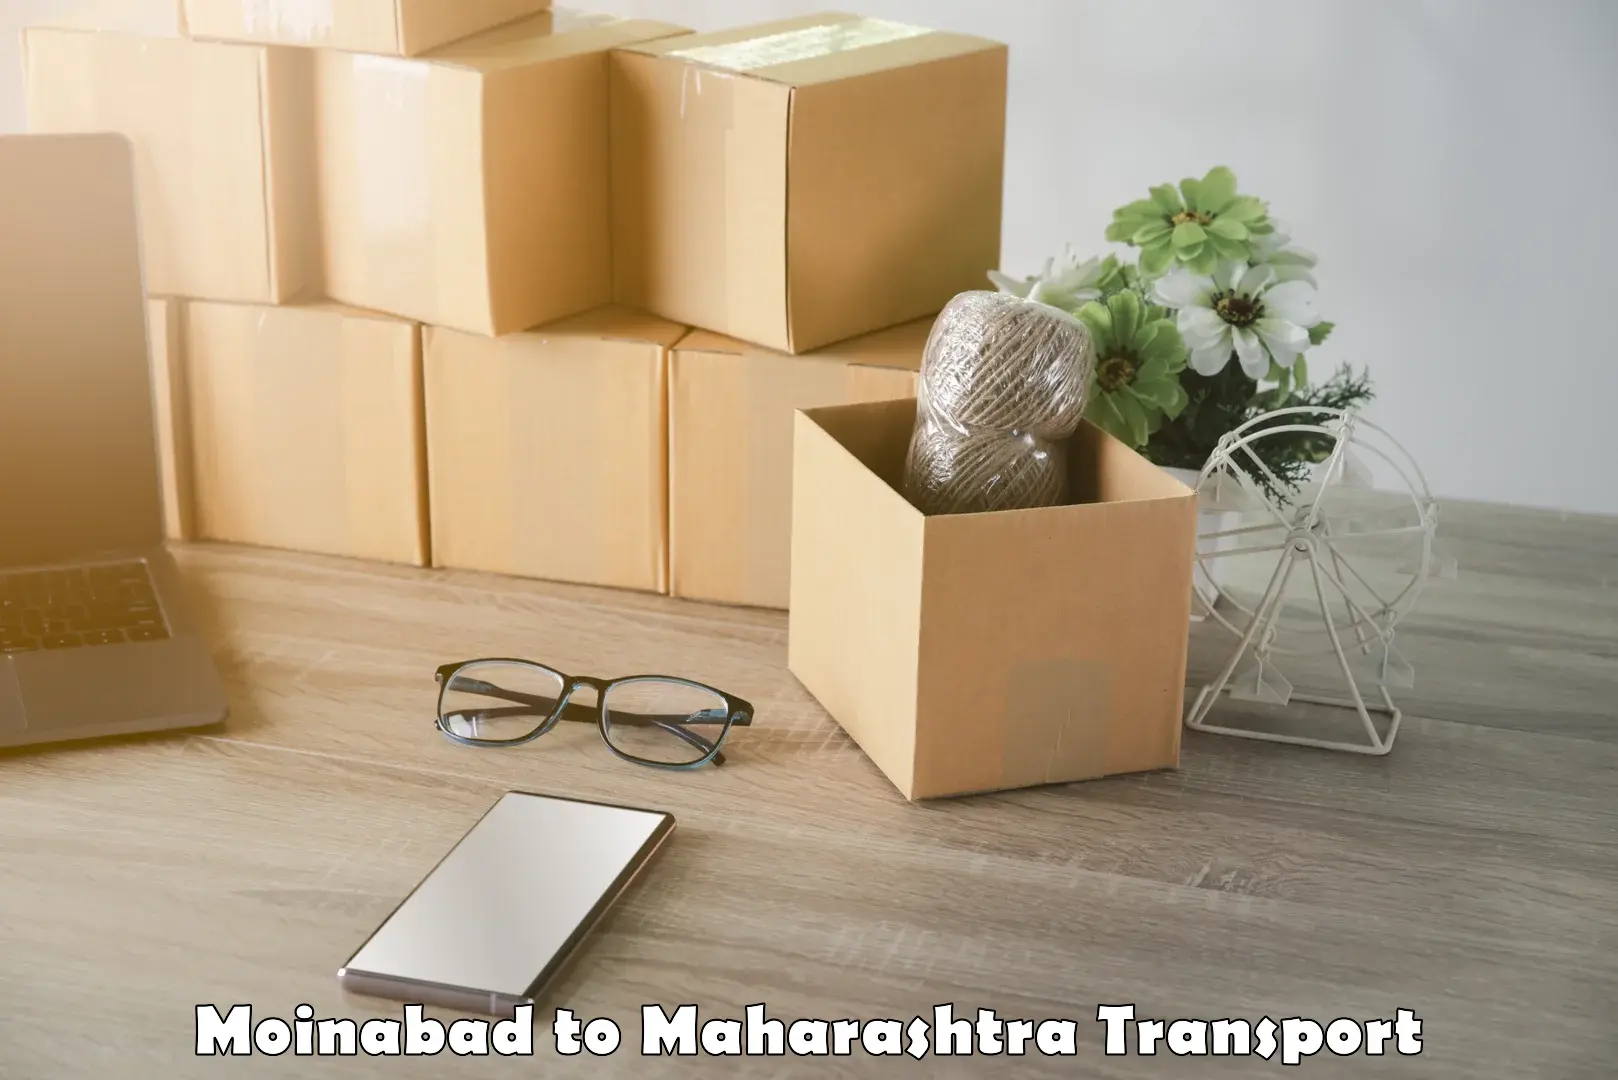 Express transport services Moinabad to Dadar